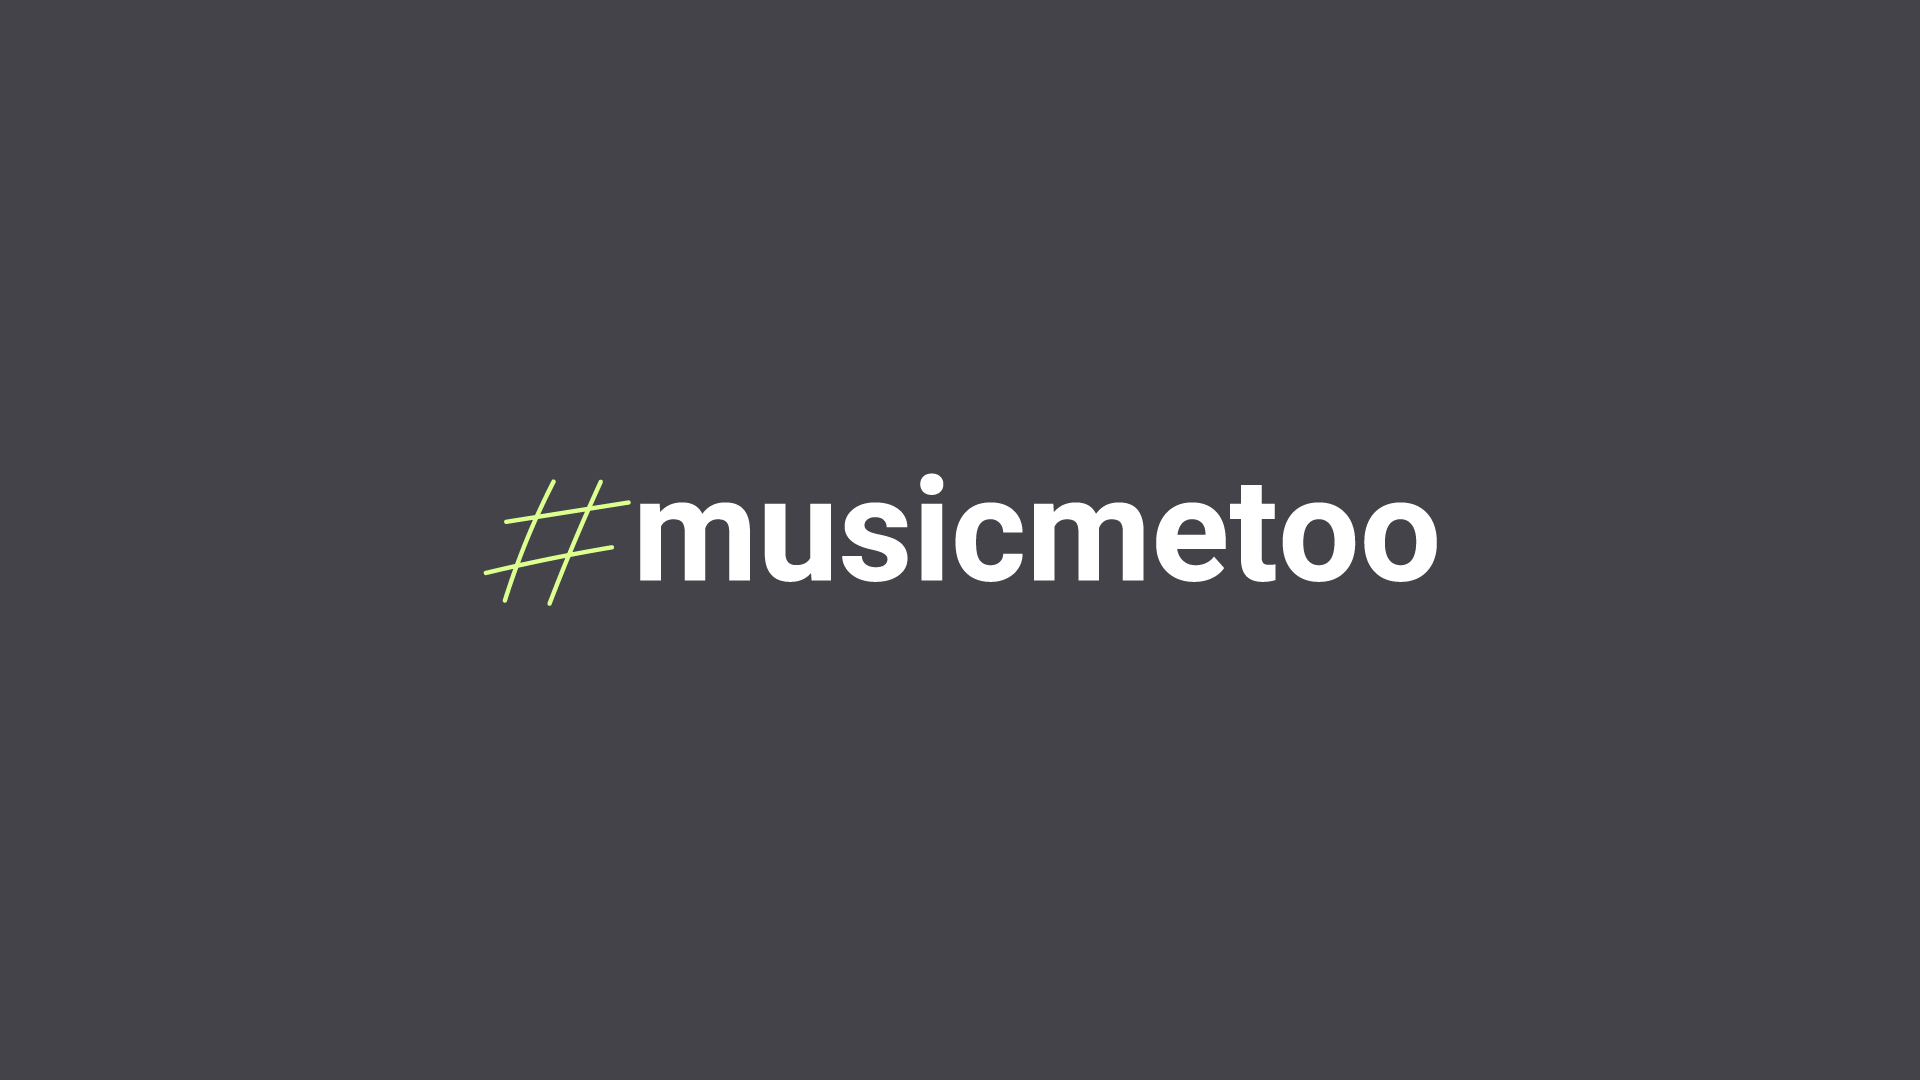 Platform Wants to Expose Violence and Abuse of Power in Music Business